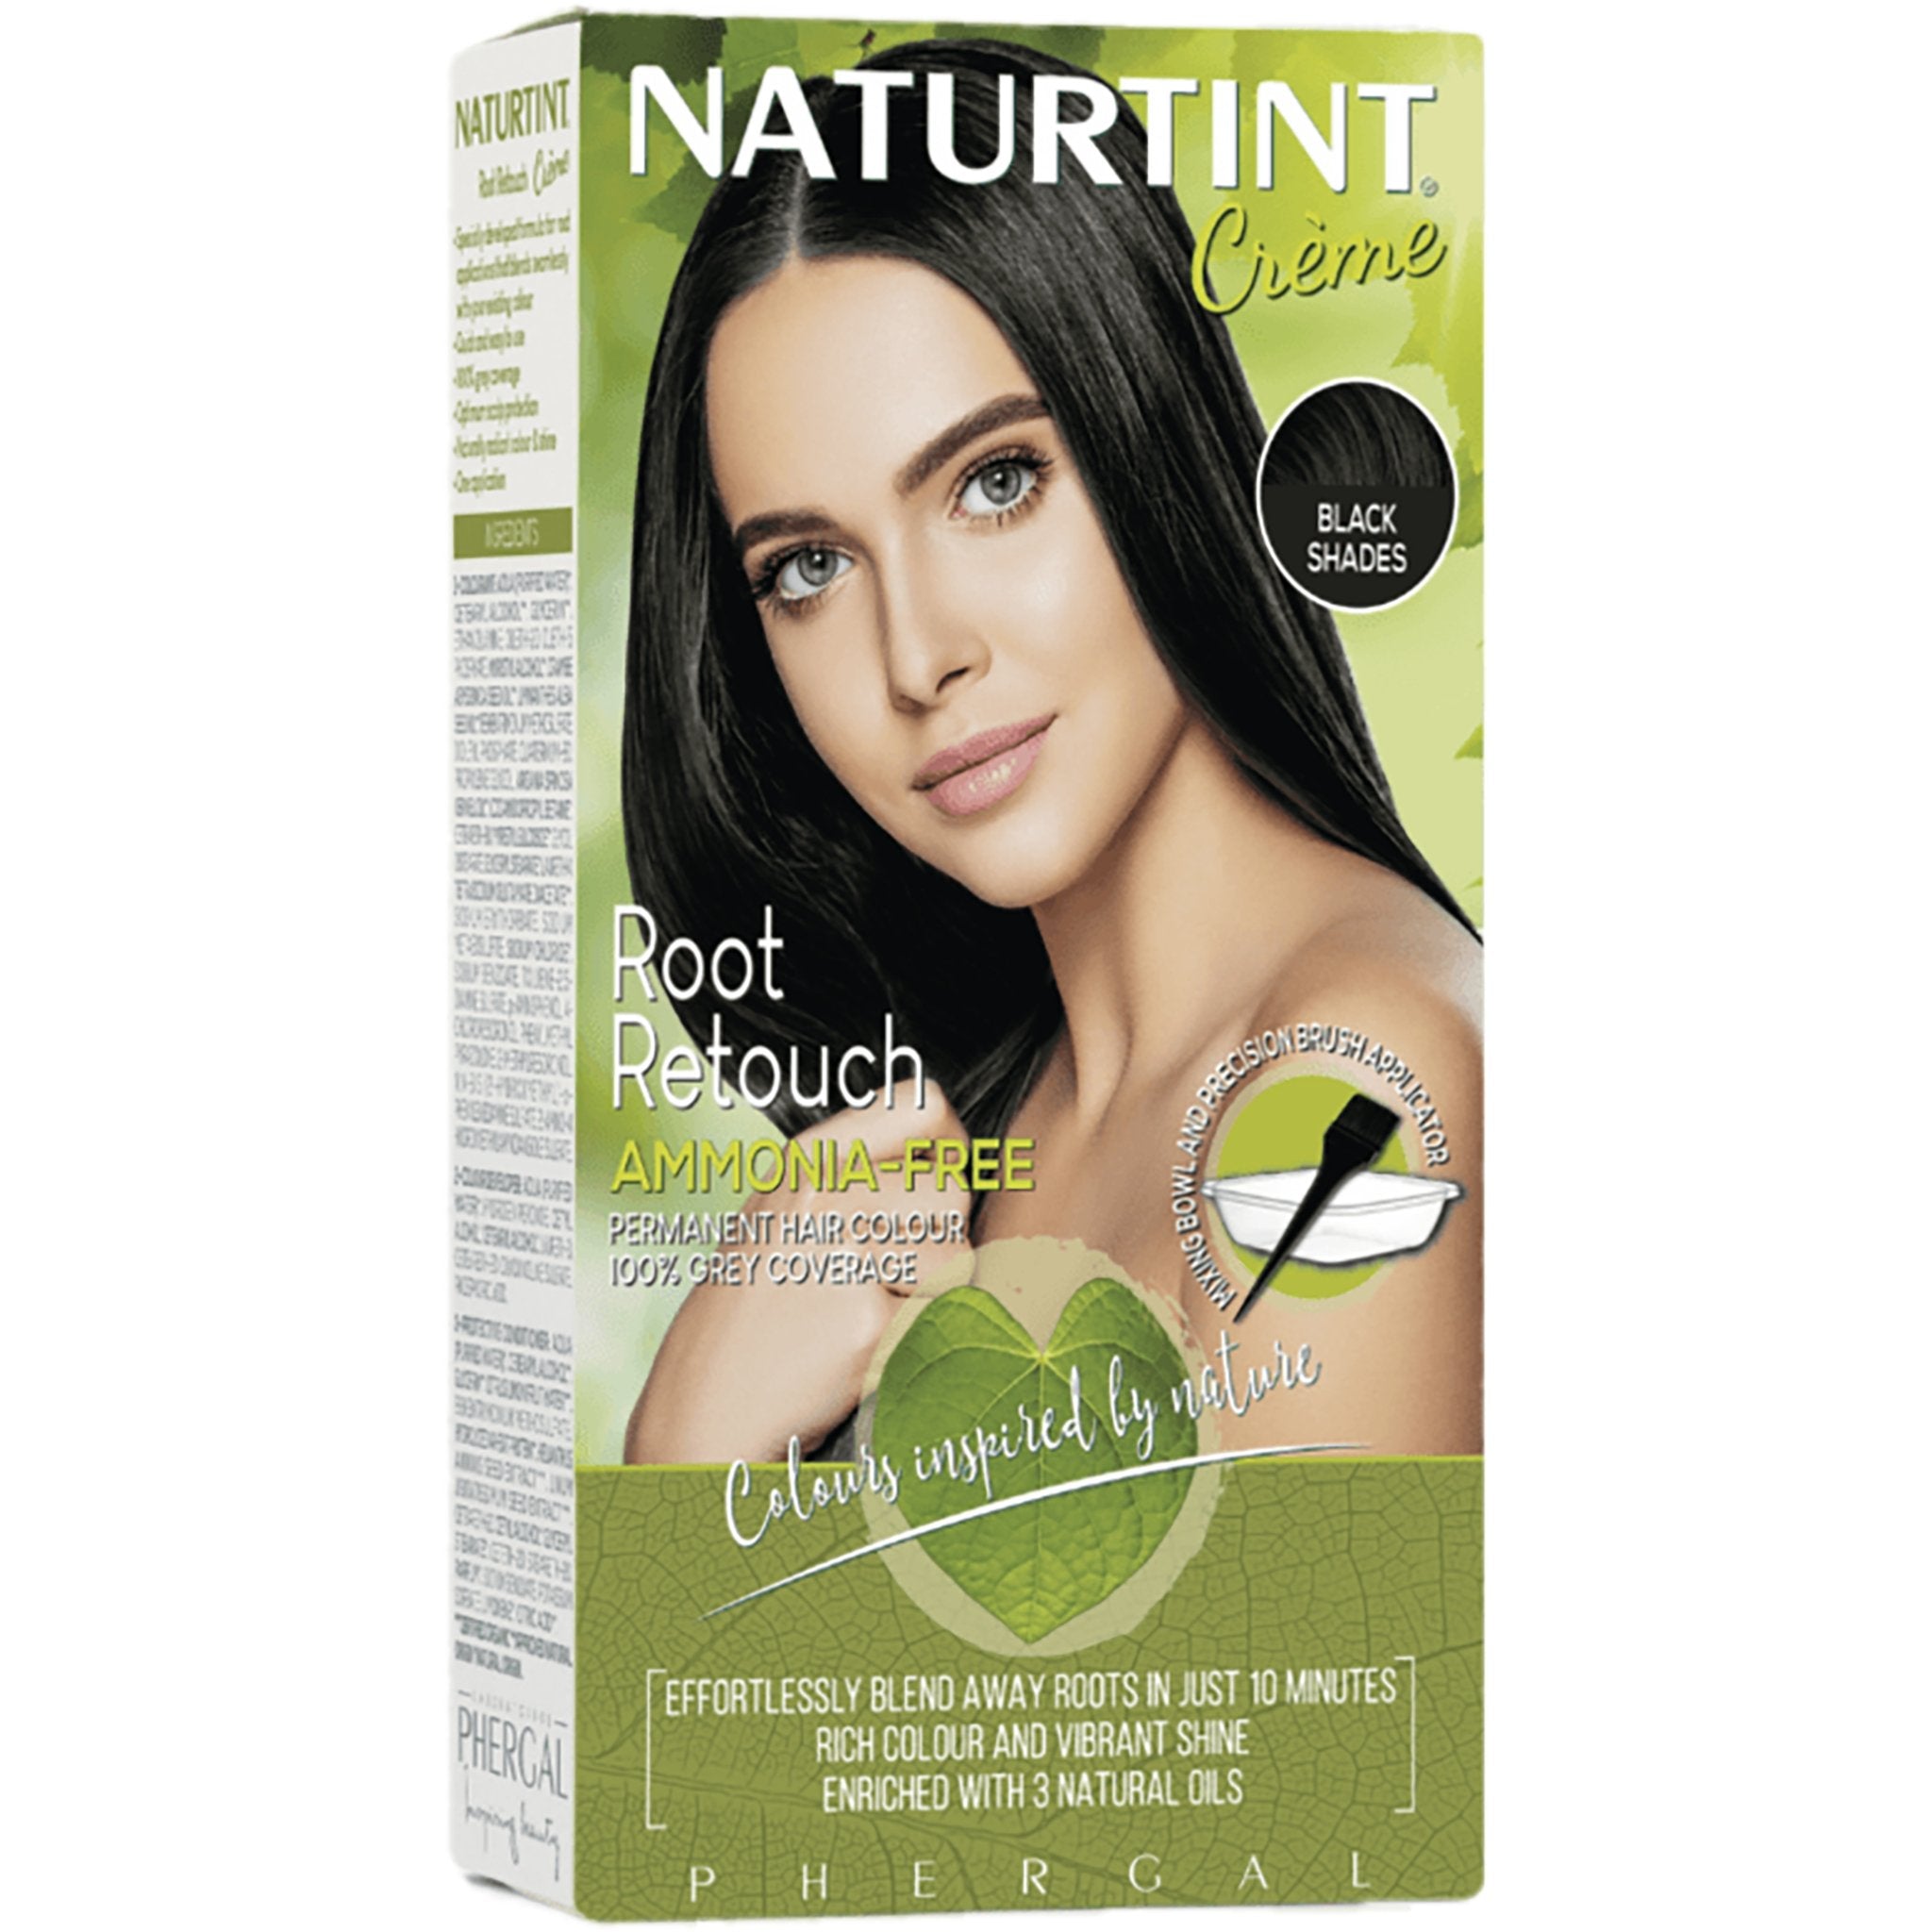 Root Retouch Creme - mypure.co.uk